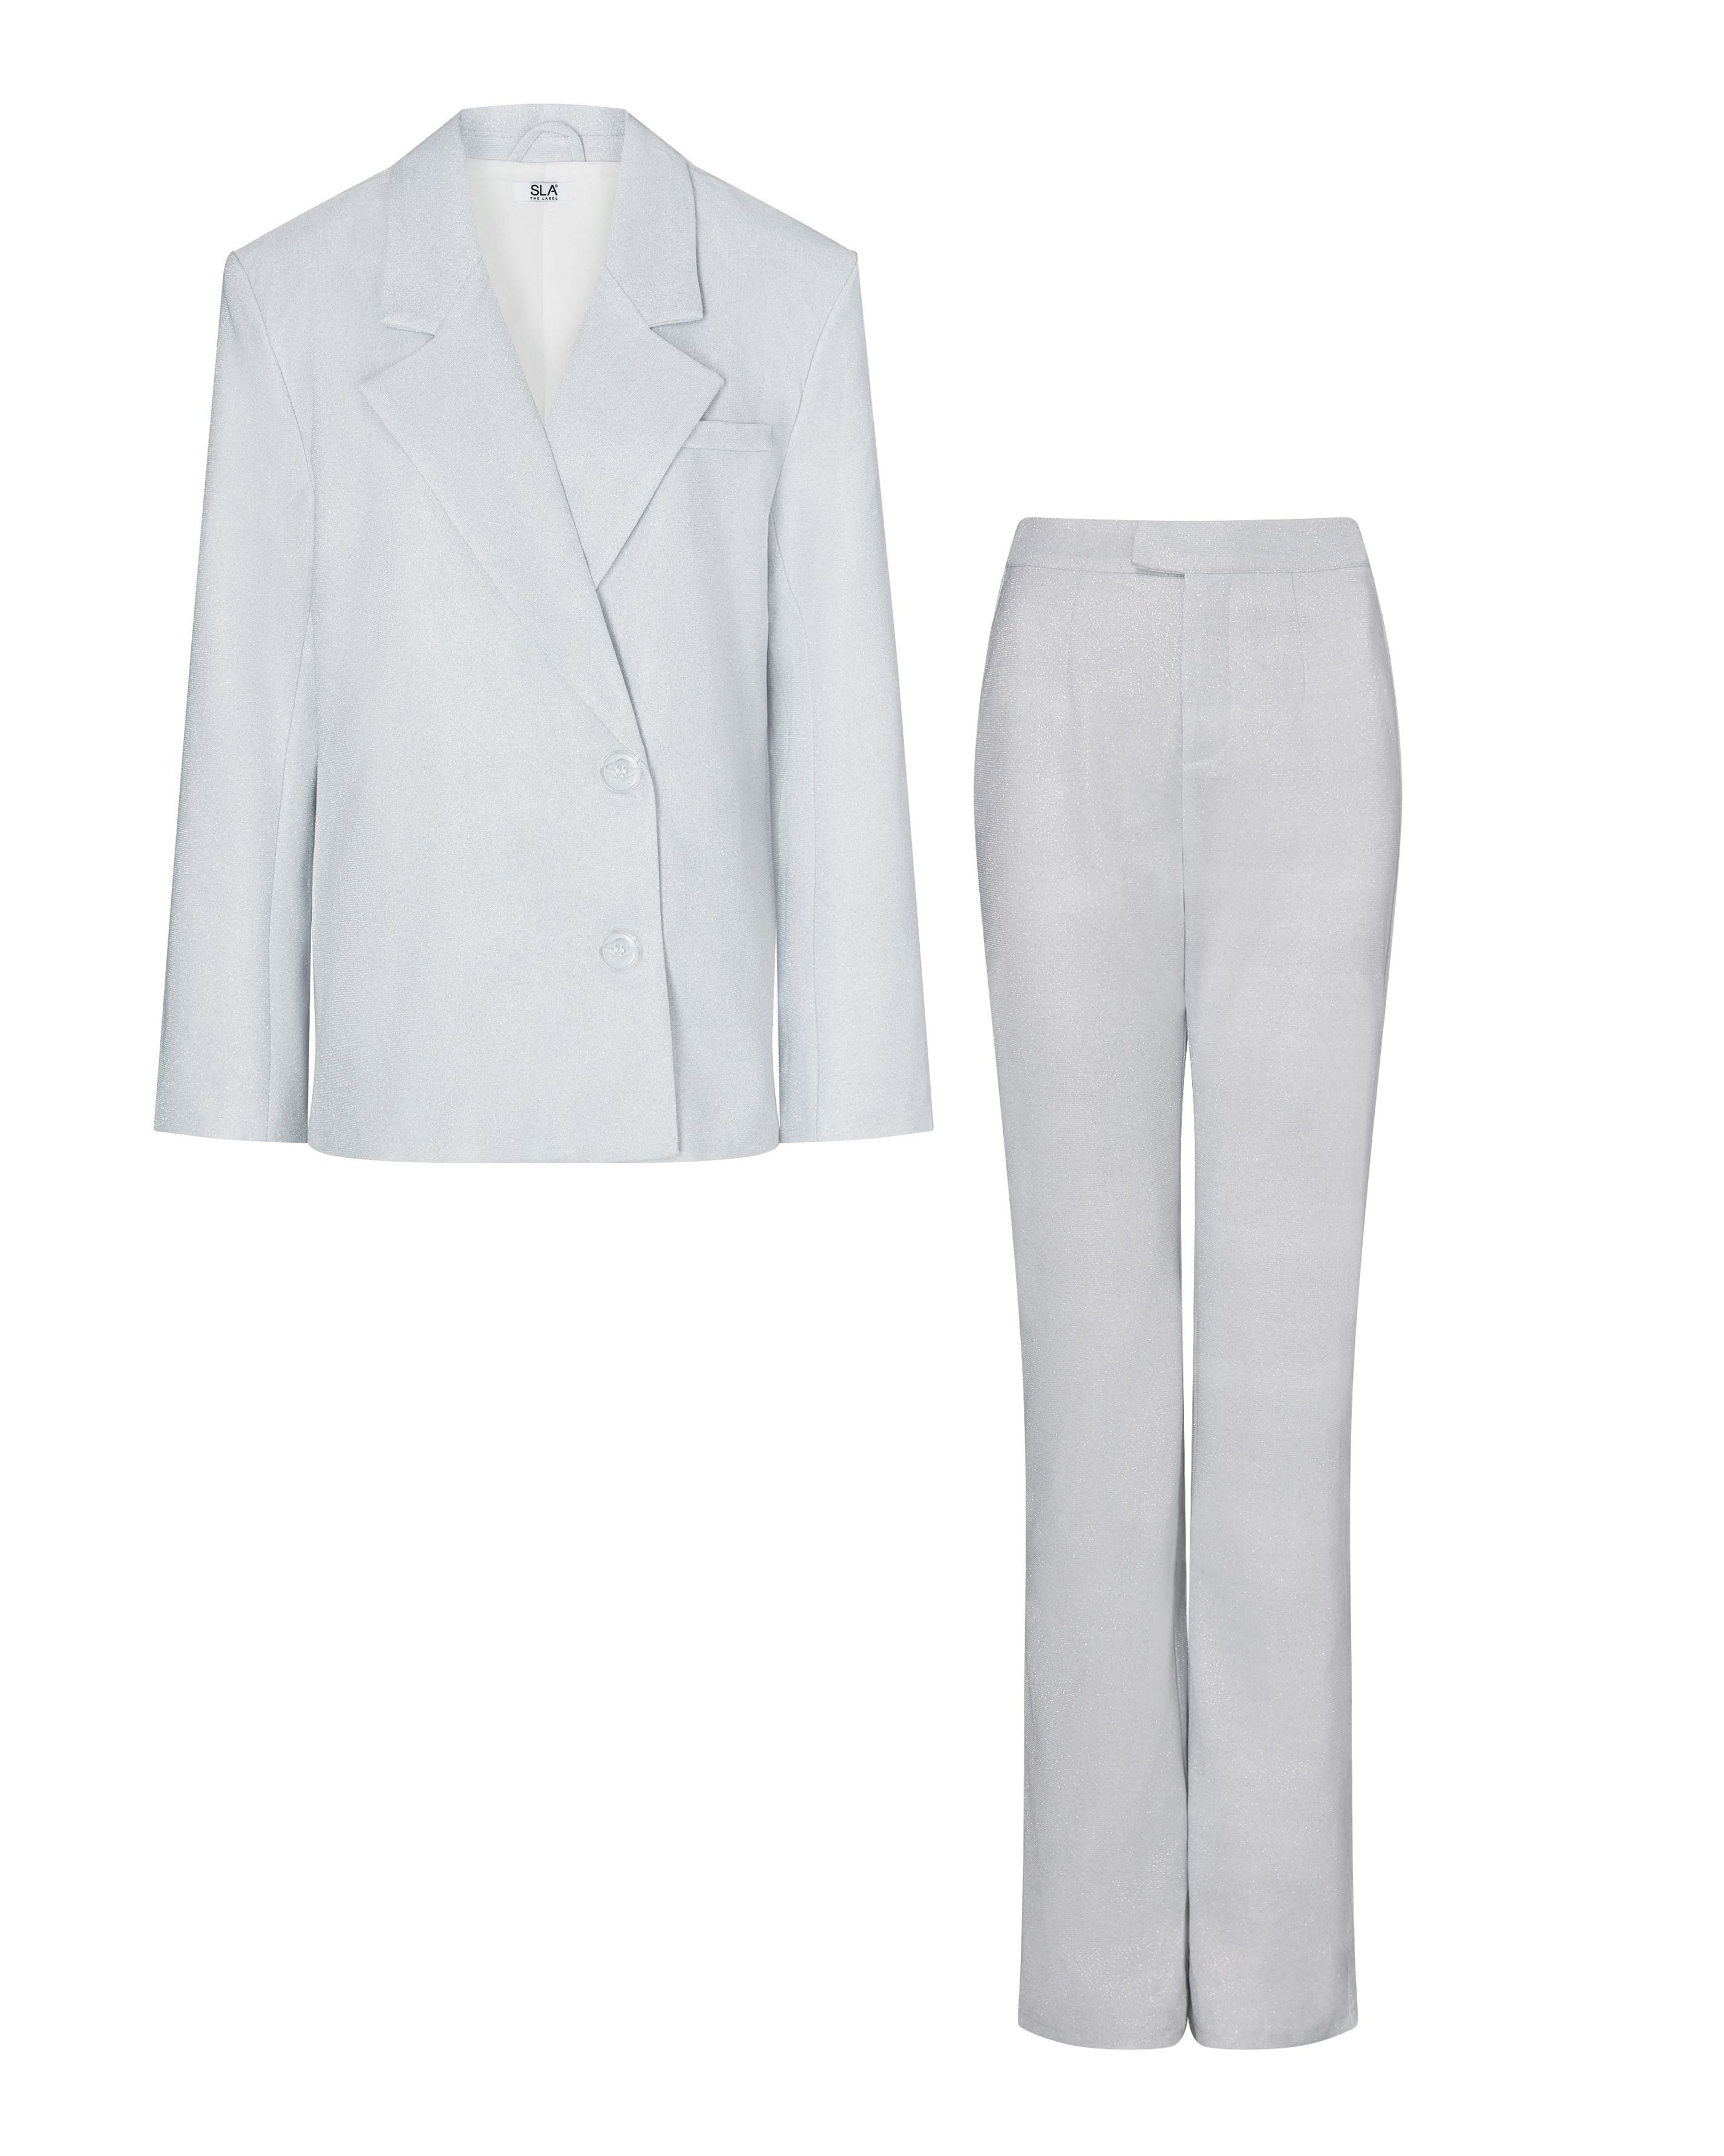 What Is An Elegant Trouser Suit